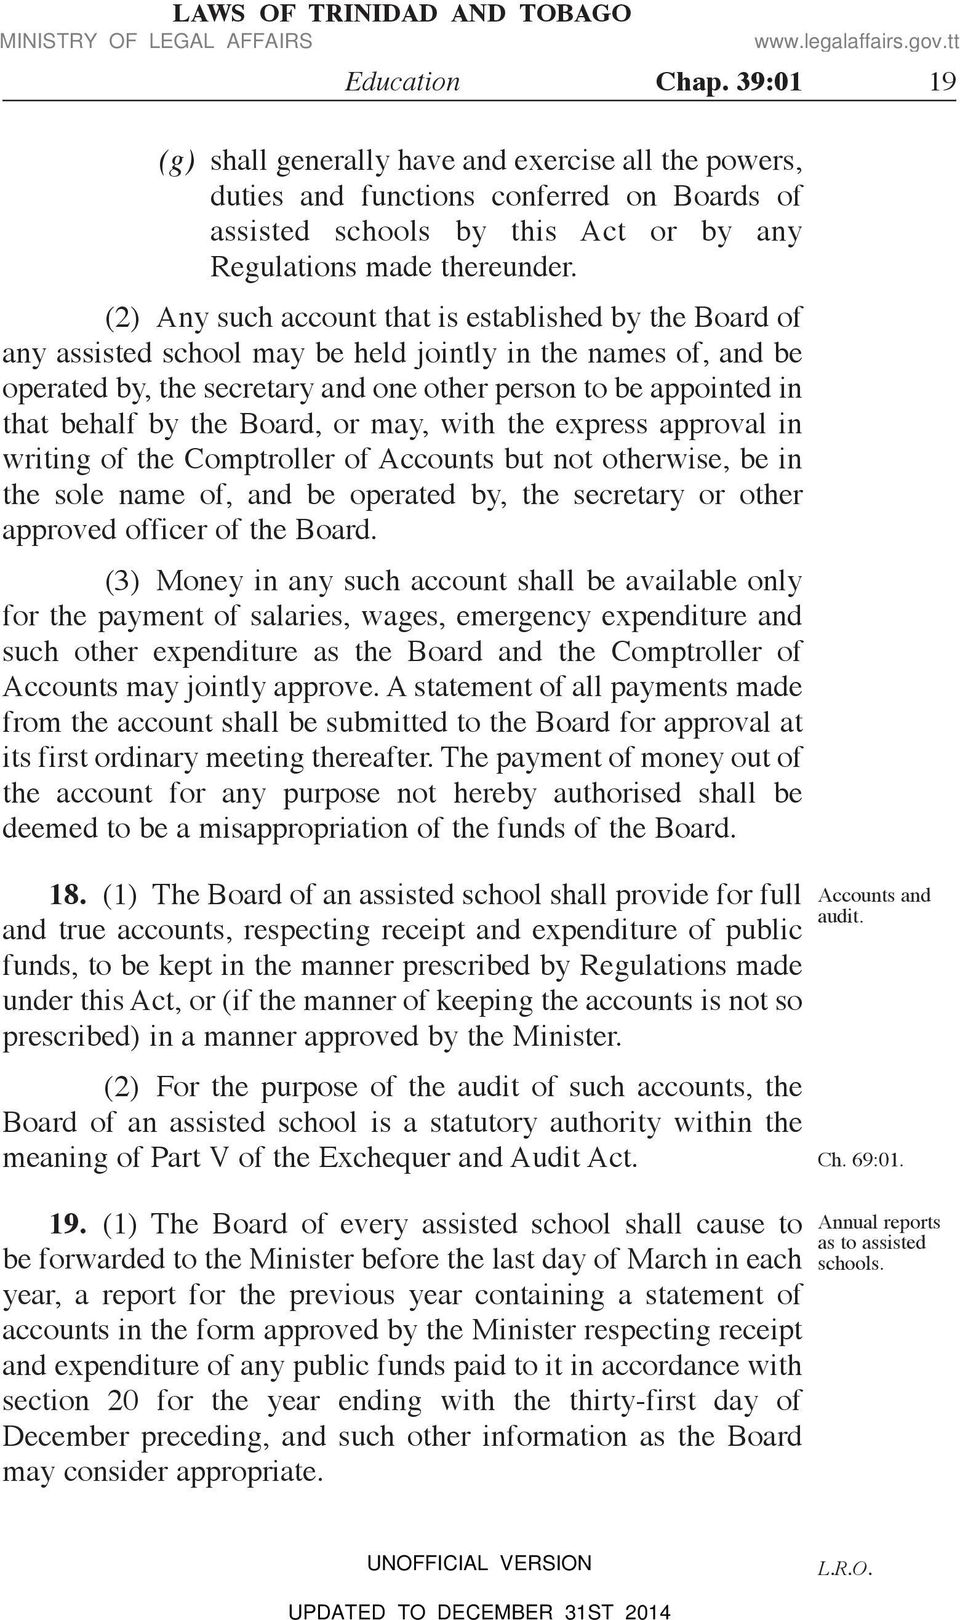 by the Board, or may, with the express approval in writing of the Comptroller of Accounts but not otherwise, be in the sole name of, and be operated by, the secretary or other approved officer of the